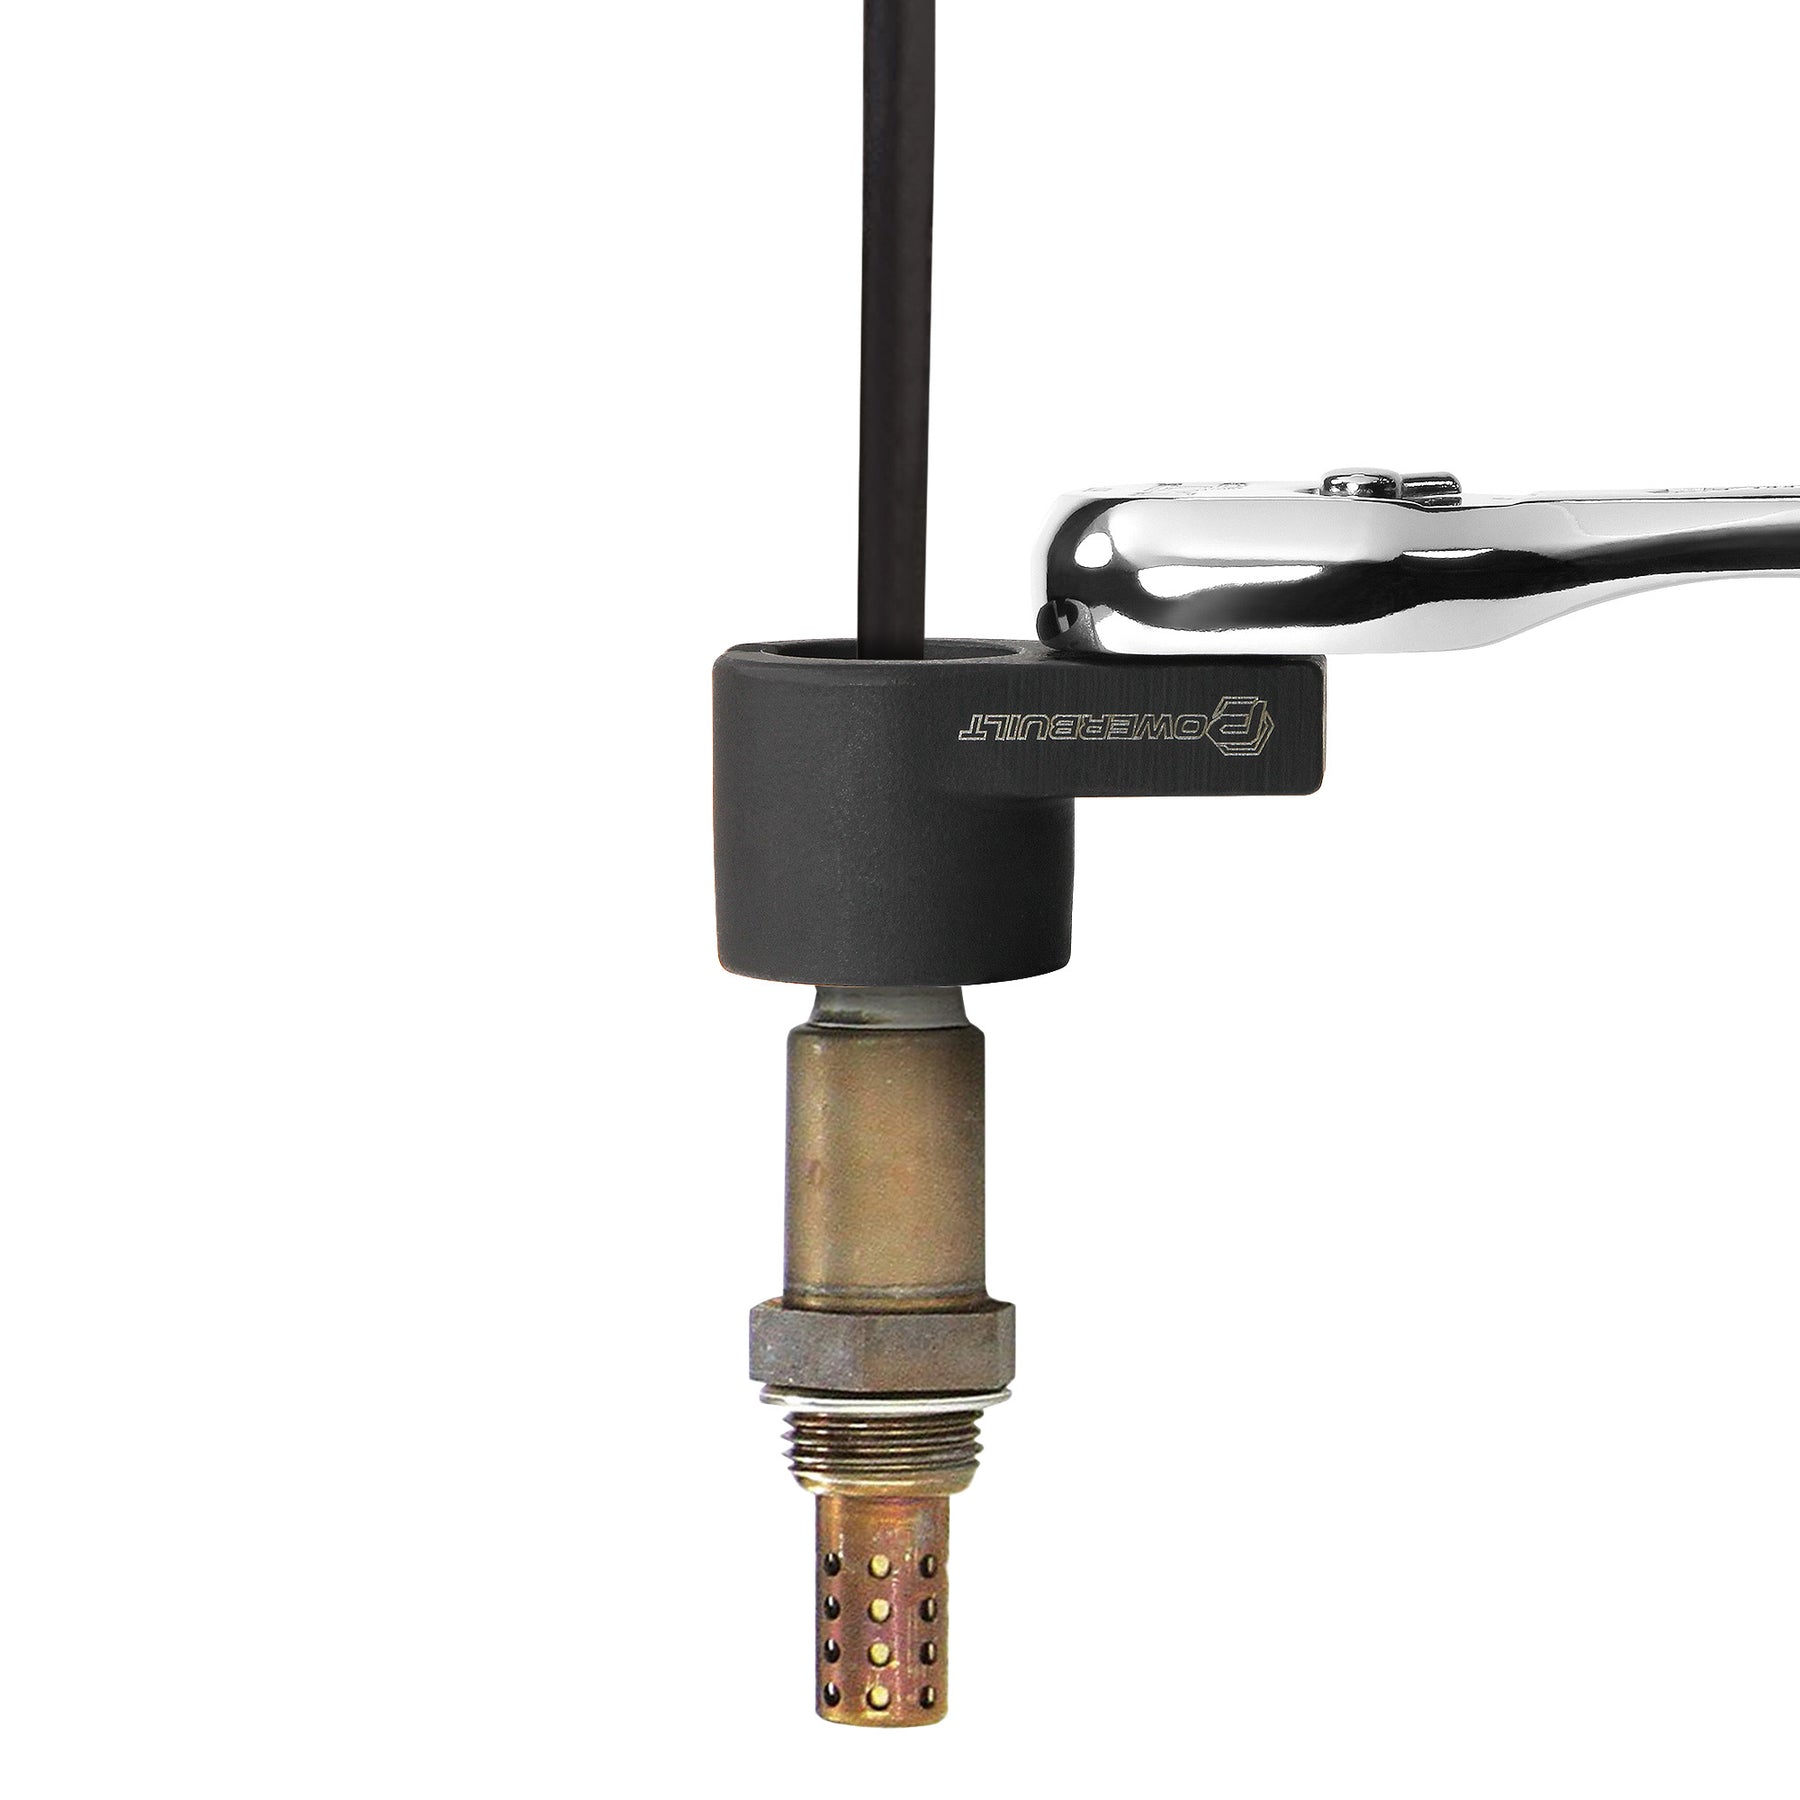 Oxygen Sensor Offset Puller - Remove and Install O2 Oxygen